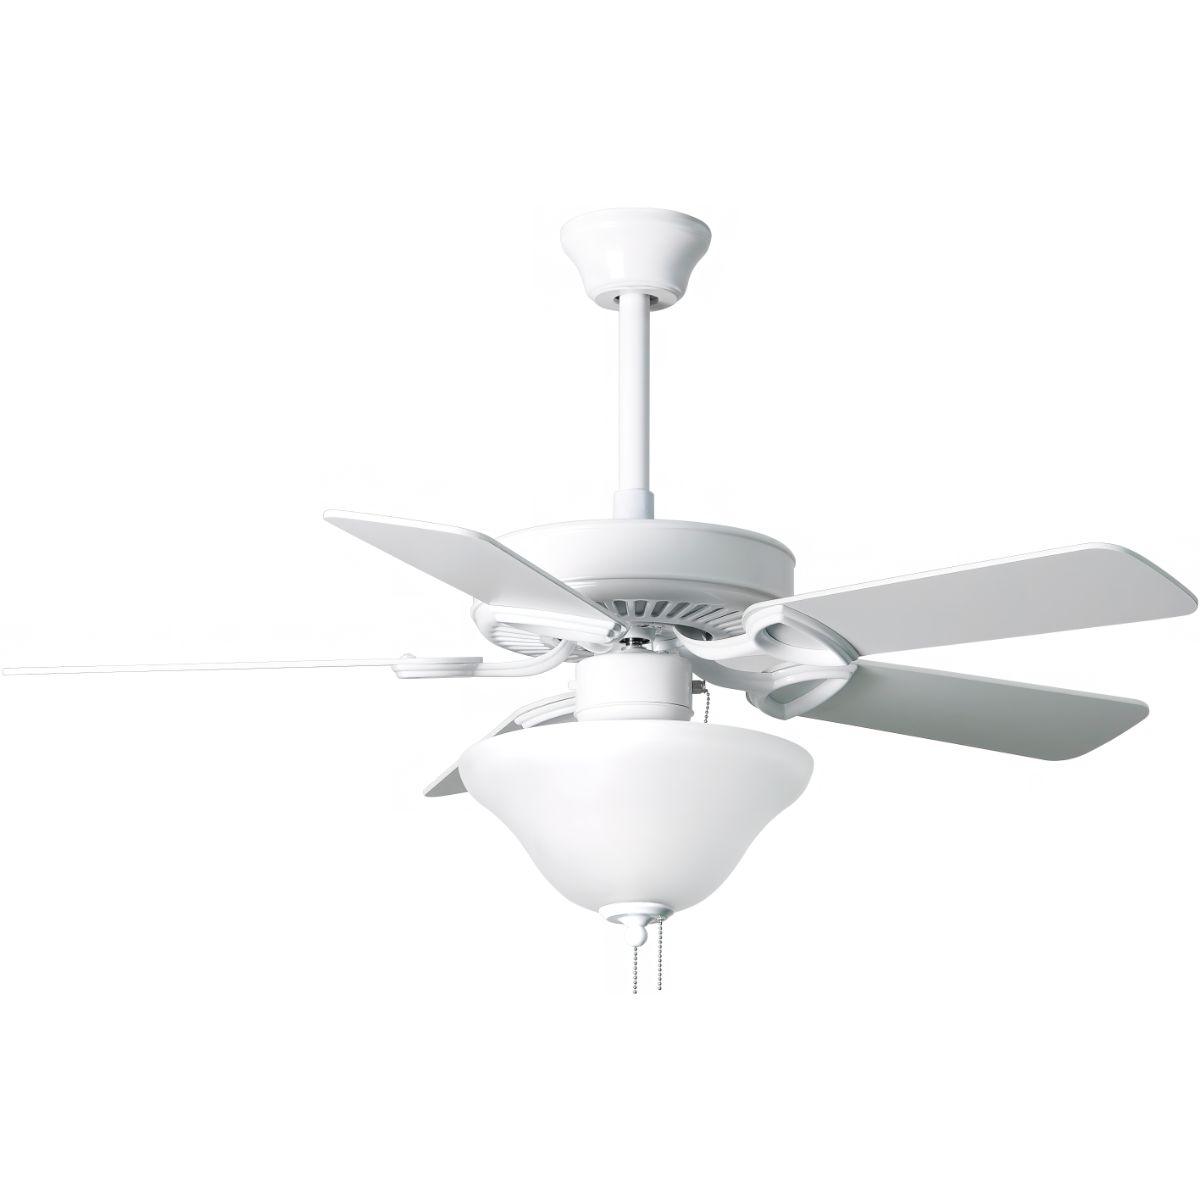 America USA 42 Inch 5 Blades Ceiling Fan With Light And Pull Chain, Gloss White Finish